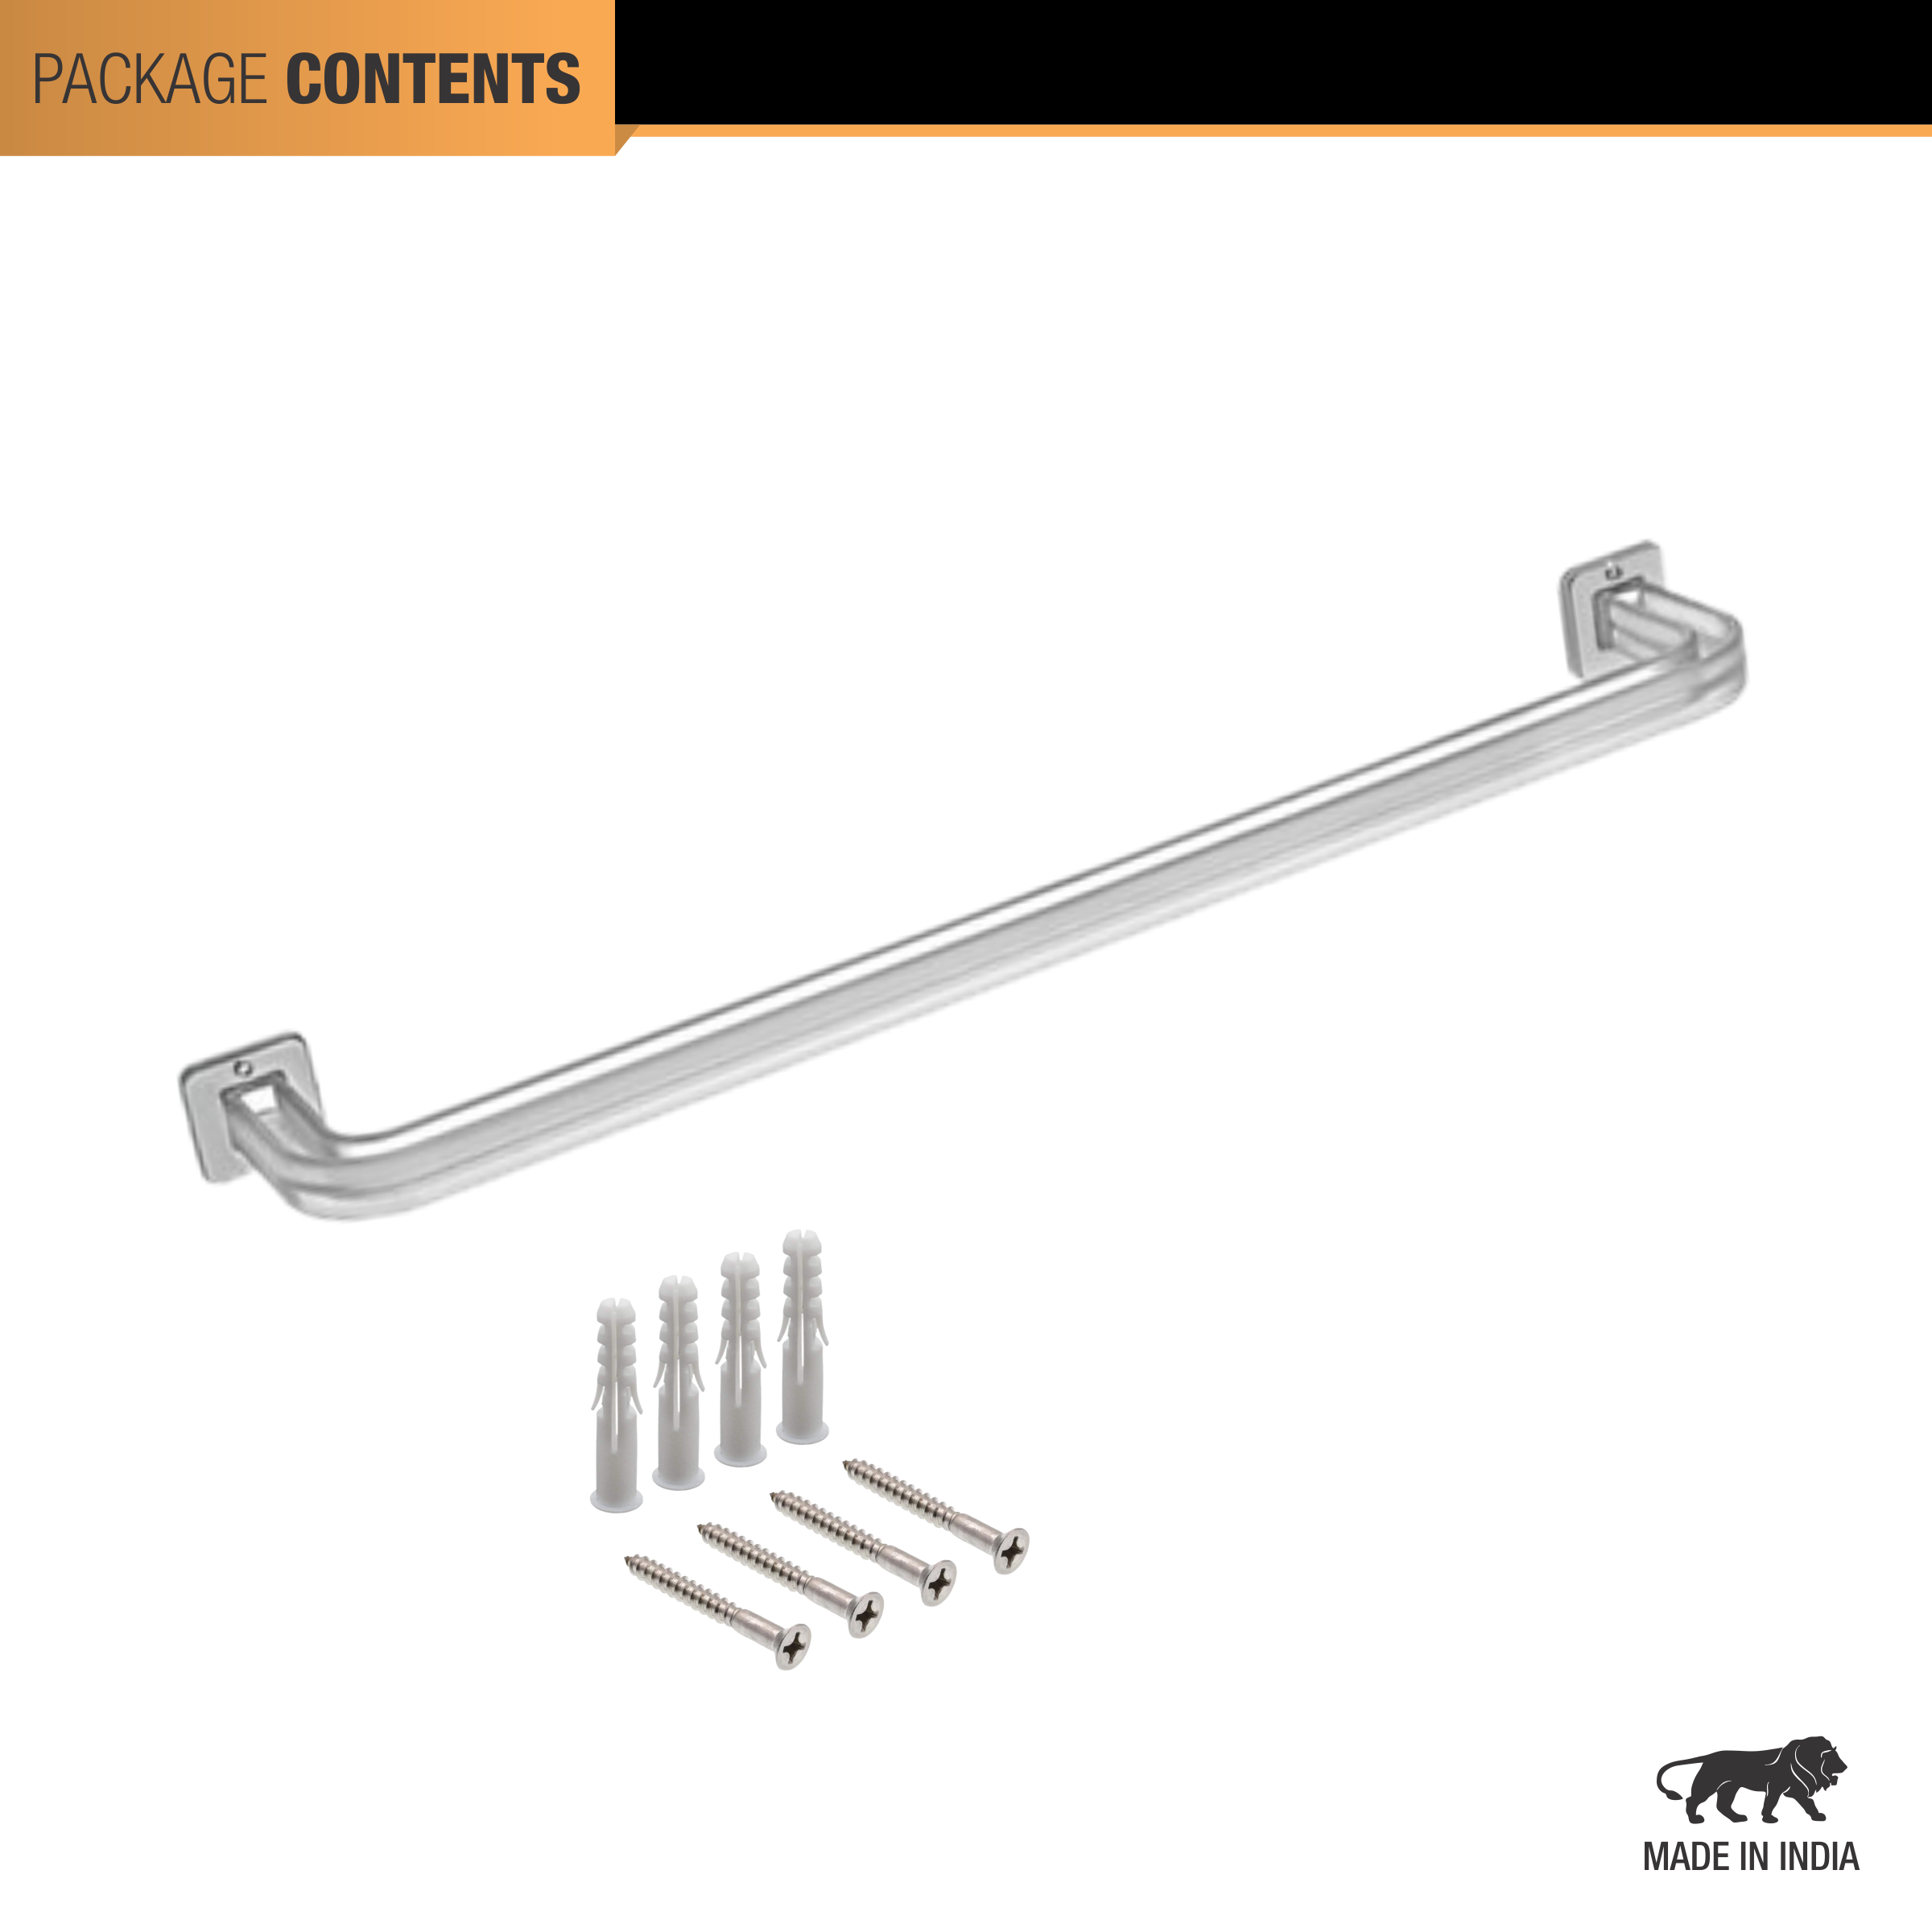 Square ABS Towel Rod (21 inches) package content